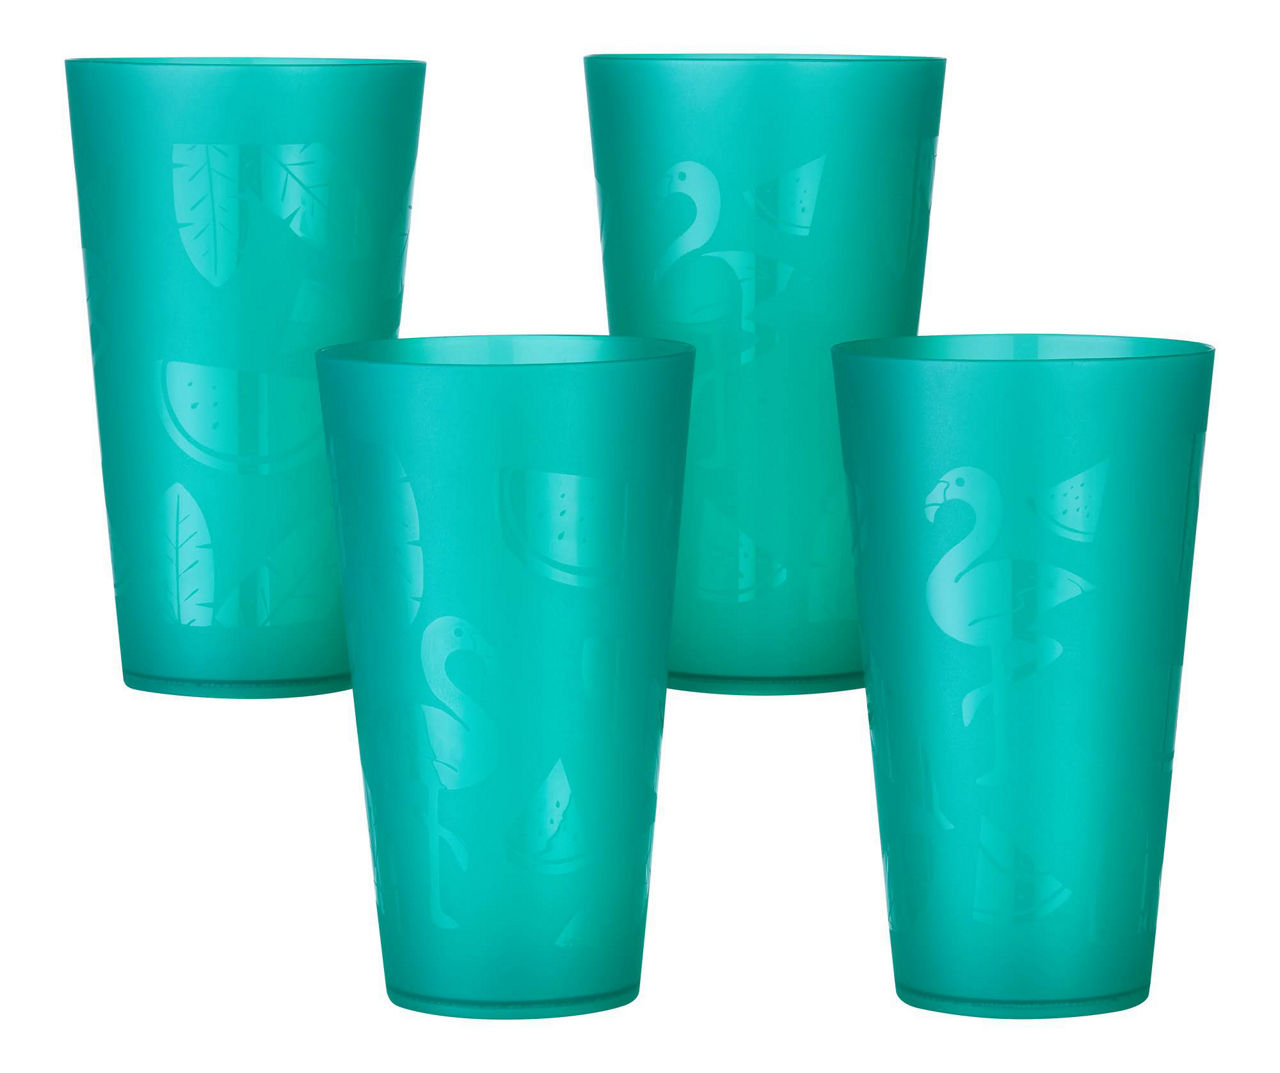 Turquoise Tropical Iced Tea Plastic Cups, 4-Pack